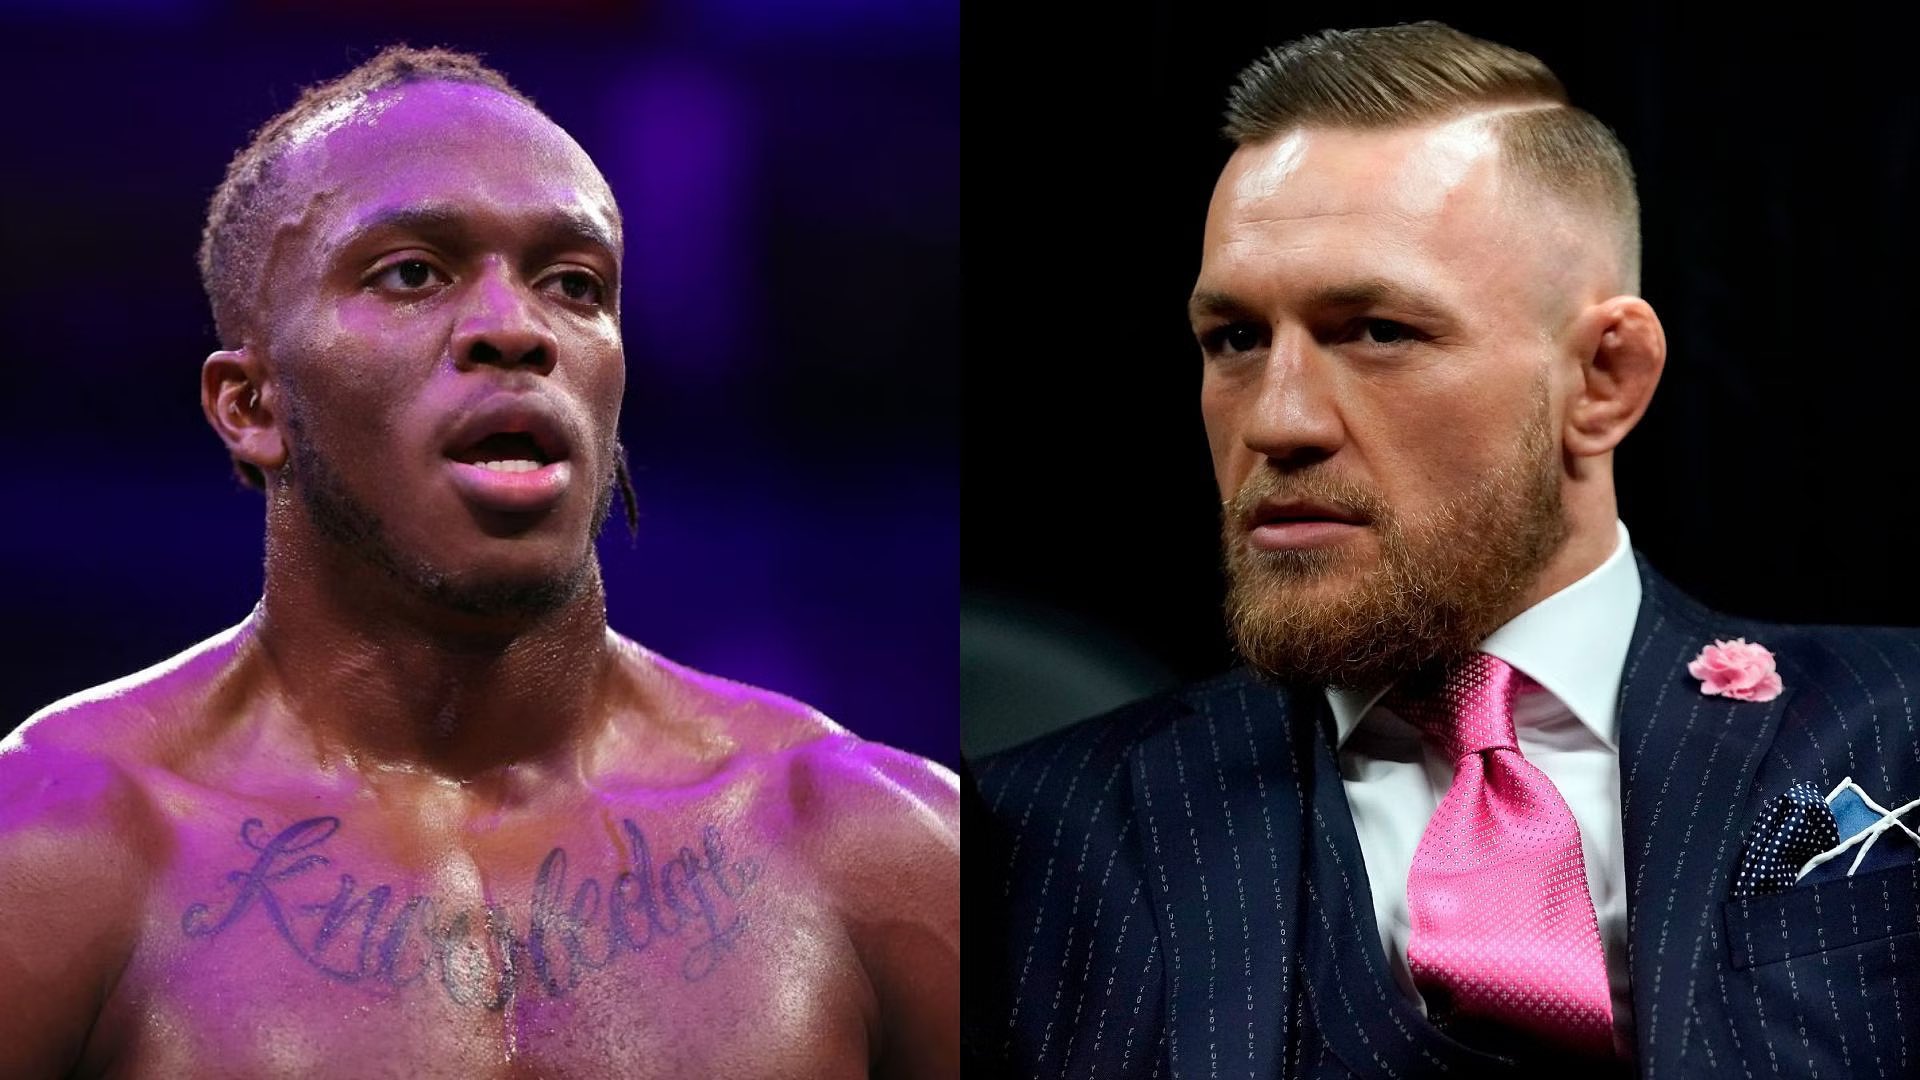 Mad Shit'- Conor McGregor Gives His Take On Floyd Mayweather's MMA Debut |  Balls.ie